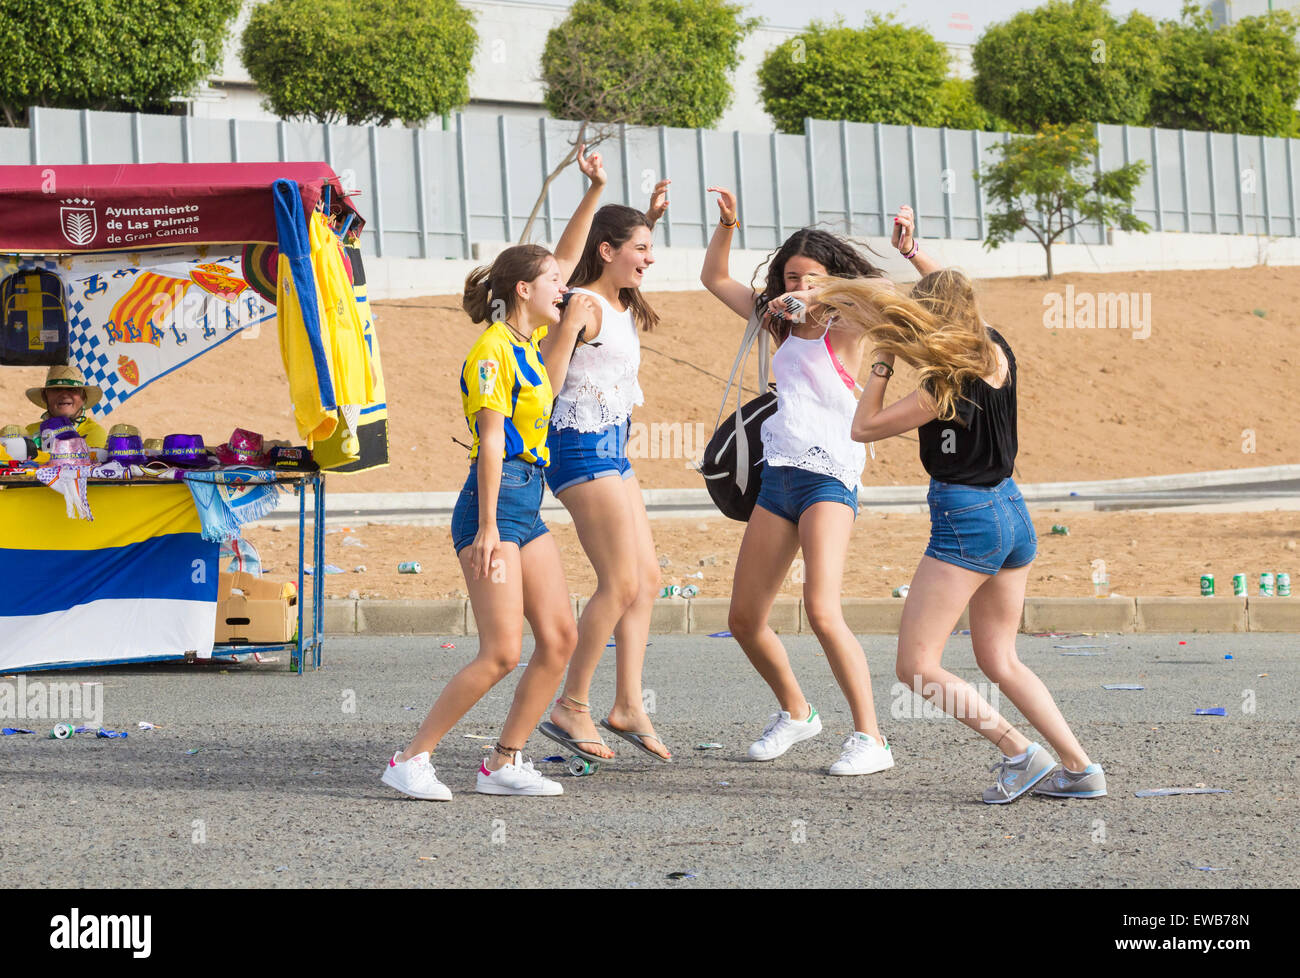 Las Palmas, Gran Canaria, Canary Islands, Spain. 21st June, 2015. Football: Four teenage Las Palmas supporters go wild outside stadium on Sunday afternoon as they hear the crowd cheer the teams first goal as Las Palmas win promotion in a dramatic second leg play-off game to join the likes of Real Madrid and Barcelona in the Spanish first division next season.  Having missed out on automatic promotion, and losing the away play-off game against Zaragoza 3-1 on Wednesday,  U.D. Las Palmas won the second play-off 2-0 at home on Sunday, winning the tie on away goal rules and securing them a p © ALA Stock Photo